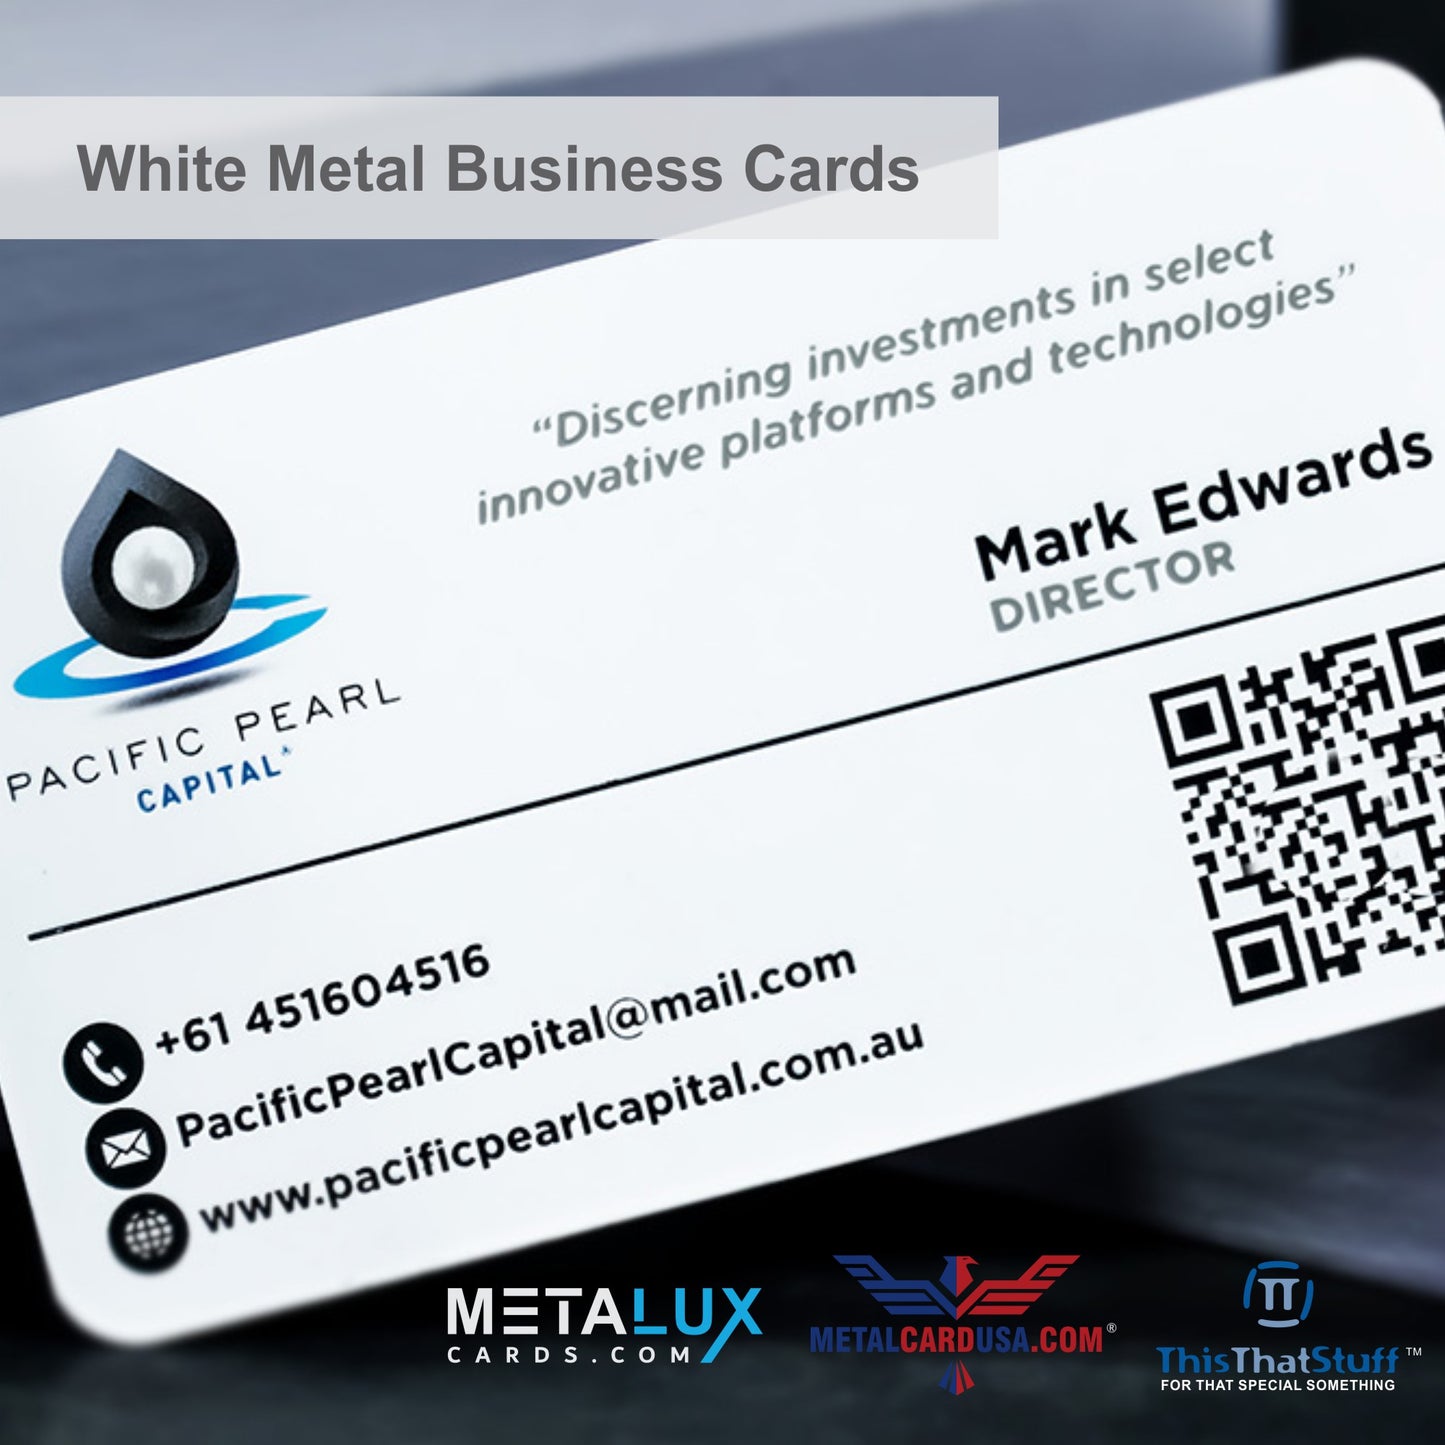 Metalux White Metal Business Cards | Membership Cards | VIP Cards | Gift Cards | Special Events